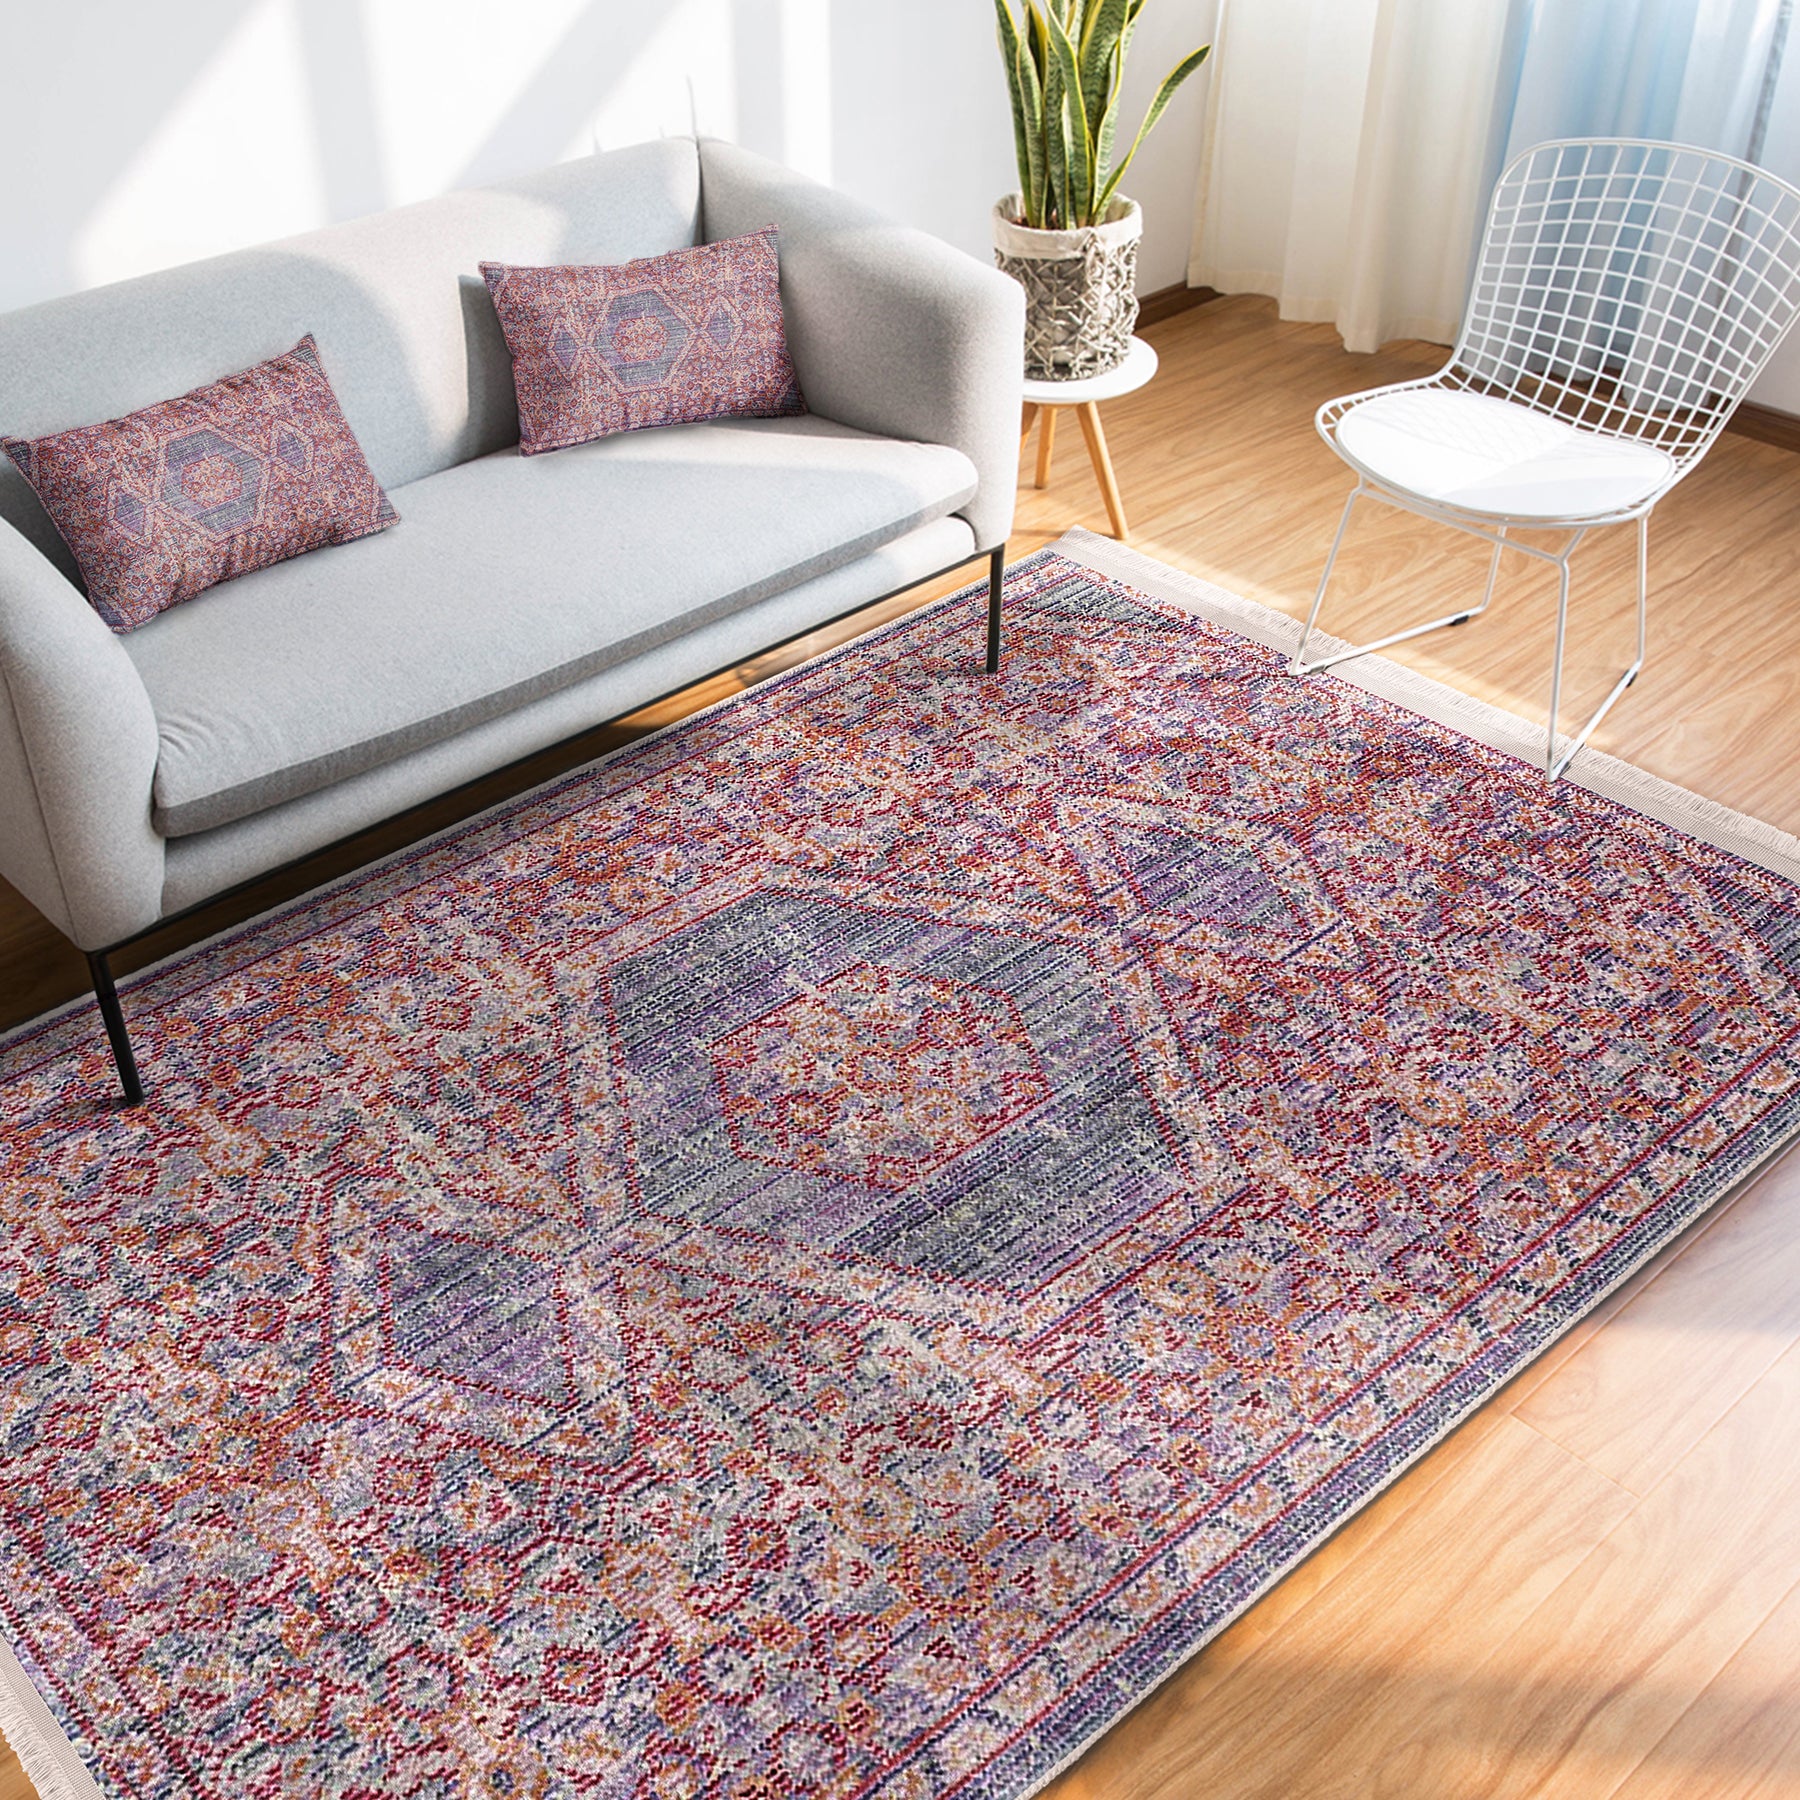 Persian Patterned Area Rug for a Touch of Heritage Elegance